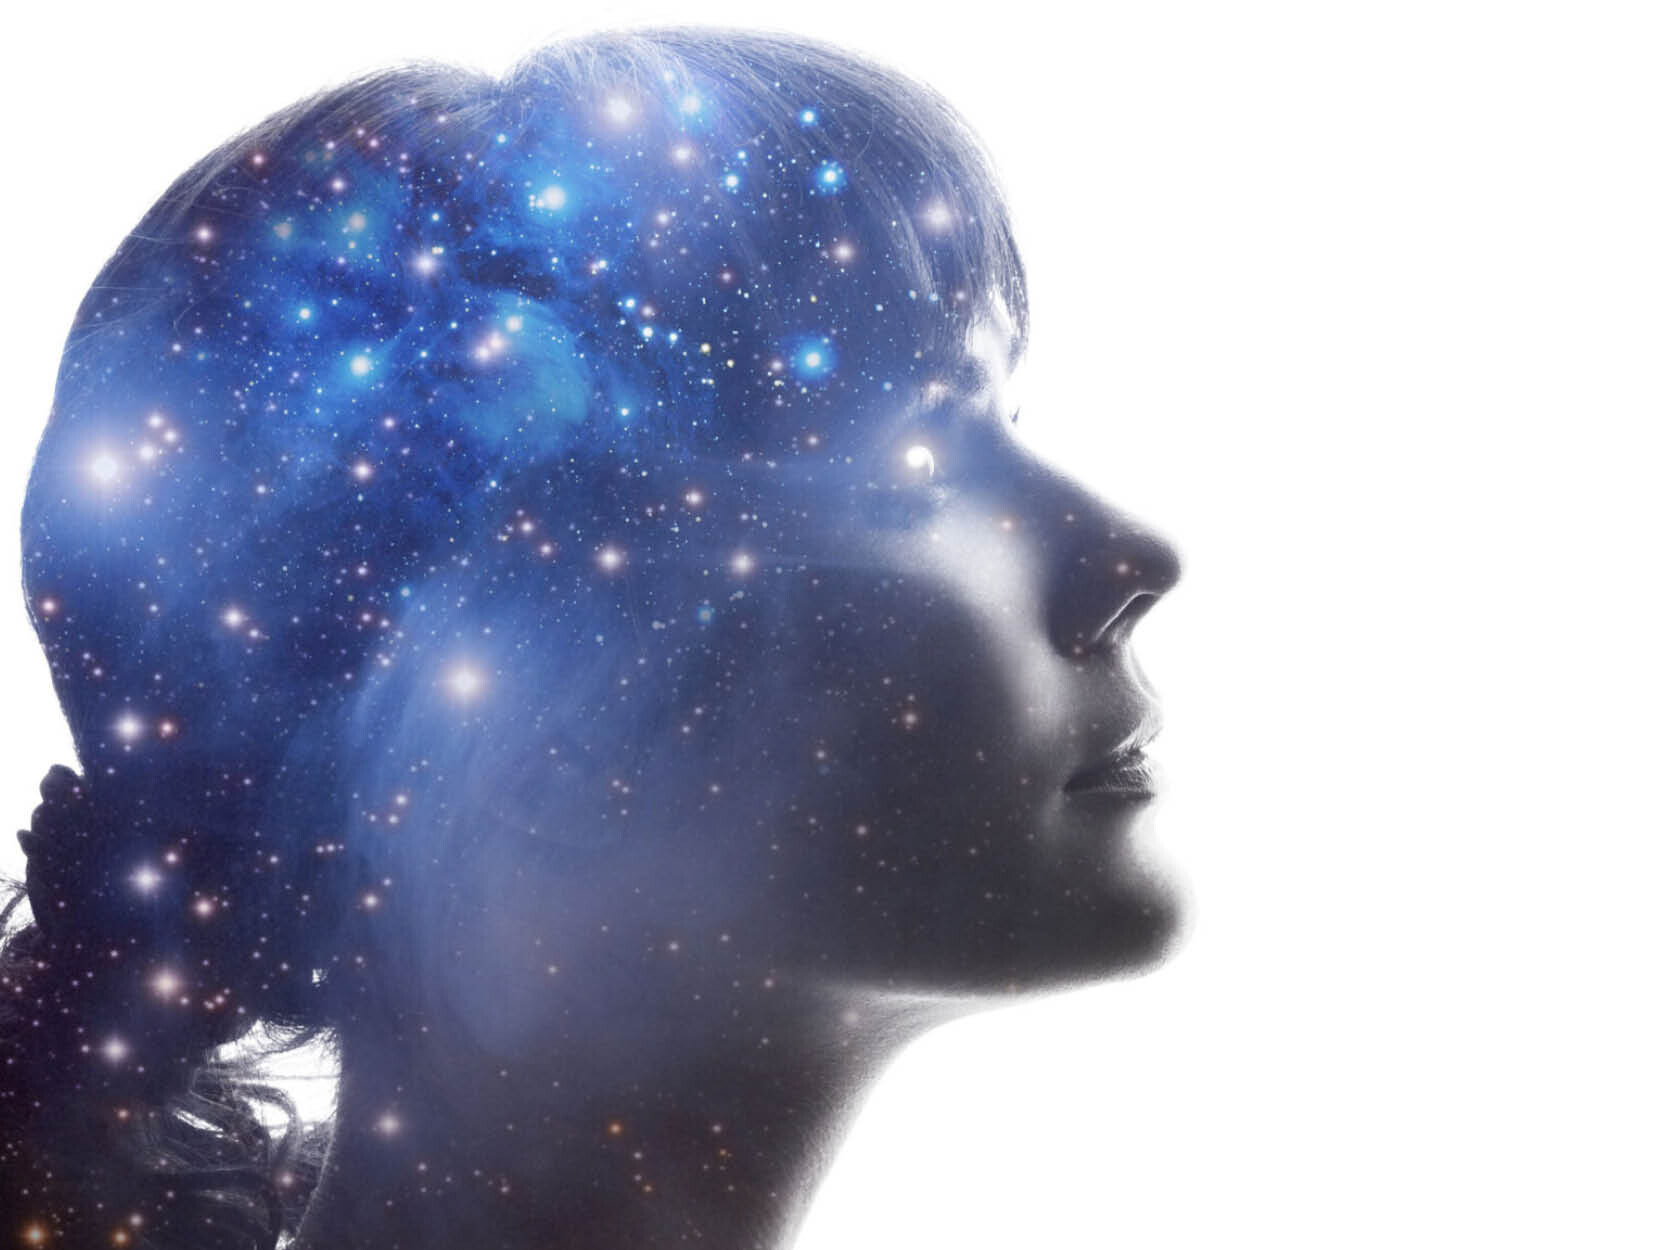 A profile image of a young woman's face, with a network of blue stars superimposed over her cranium